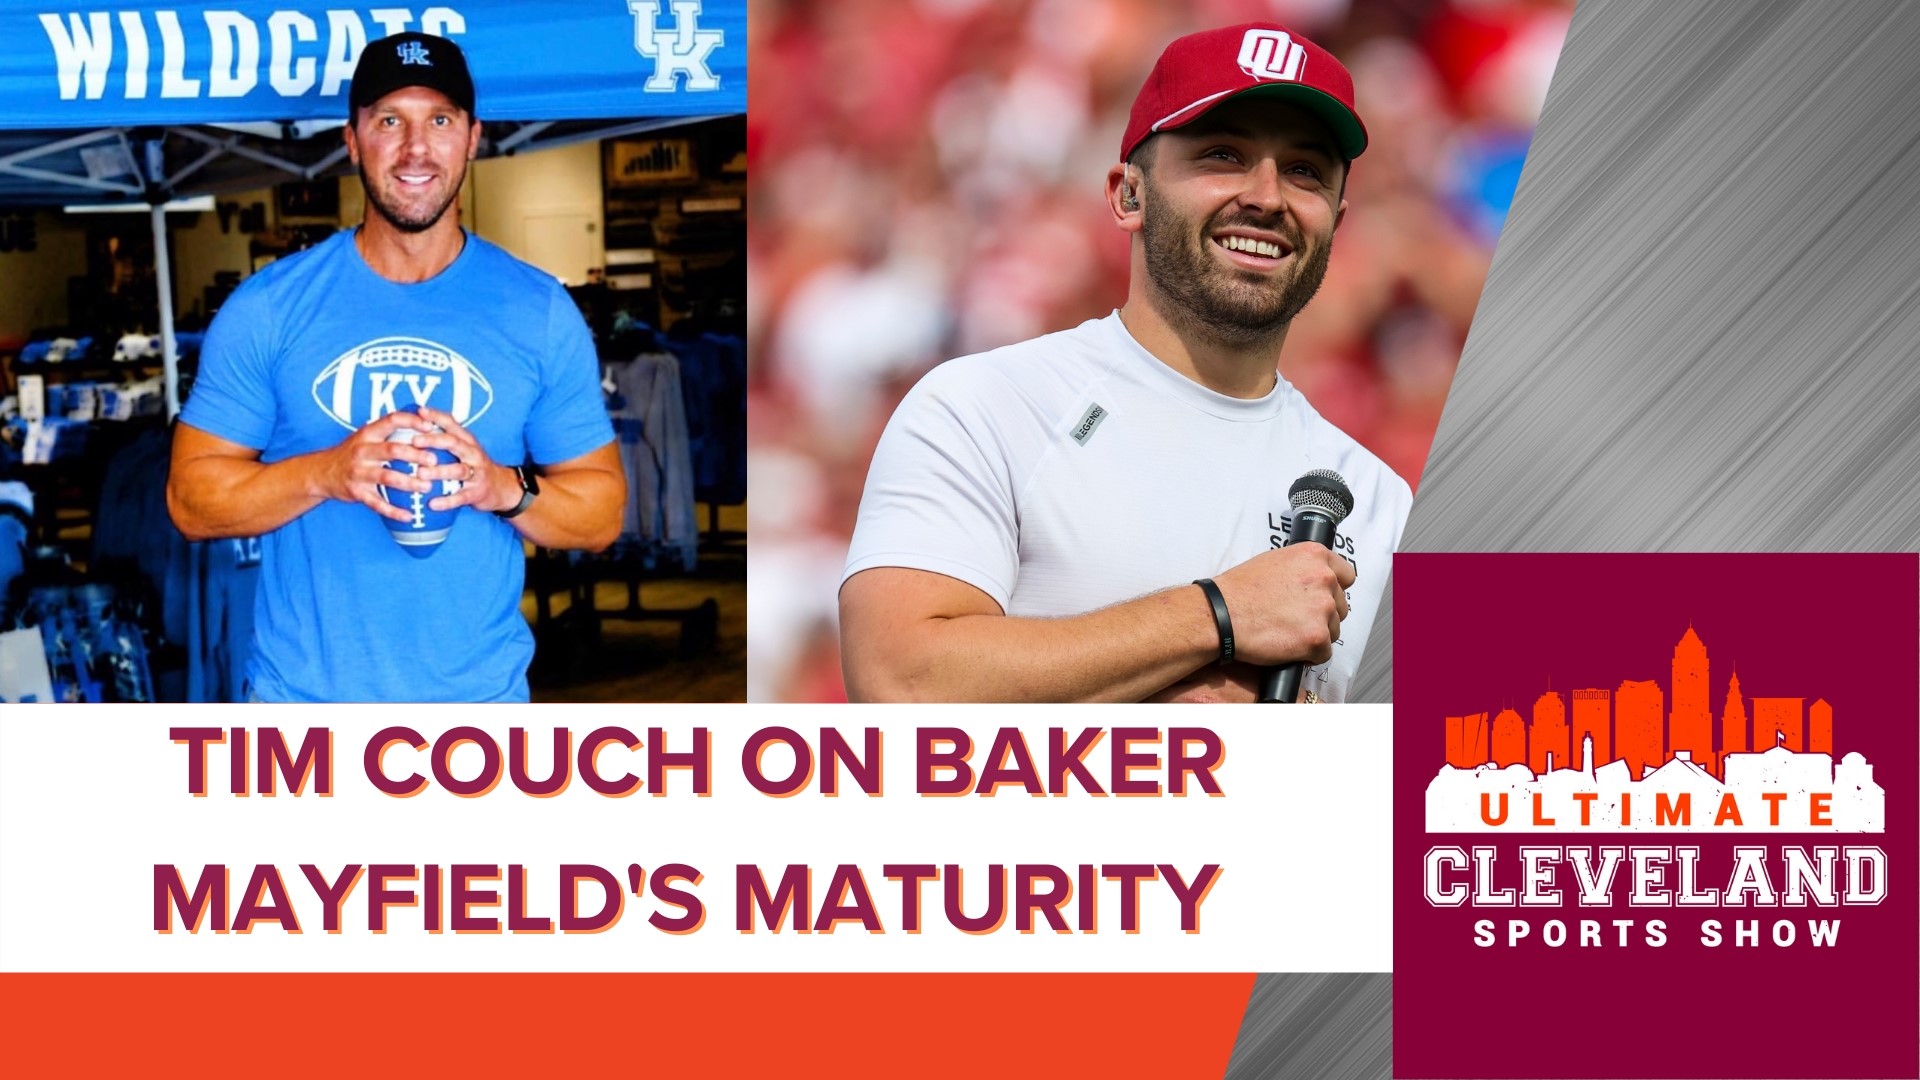 Tim Couch speaks on Baker Mayfield's maturity and ability to prove himself on the field; Deshaun Watson's suspension and his history with Kelly Holcomb.